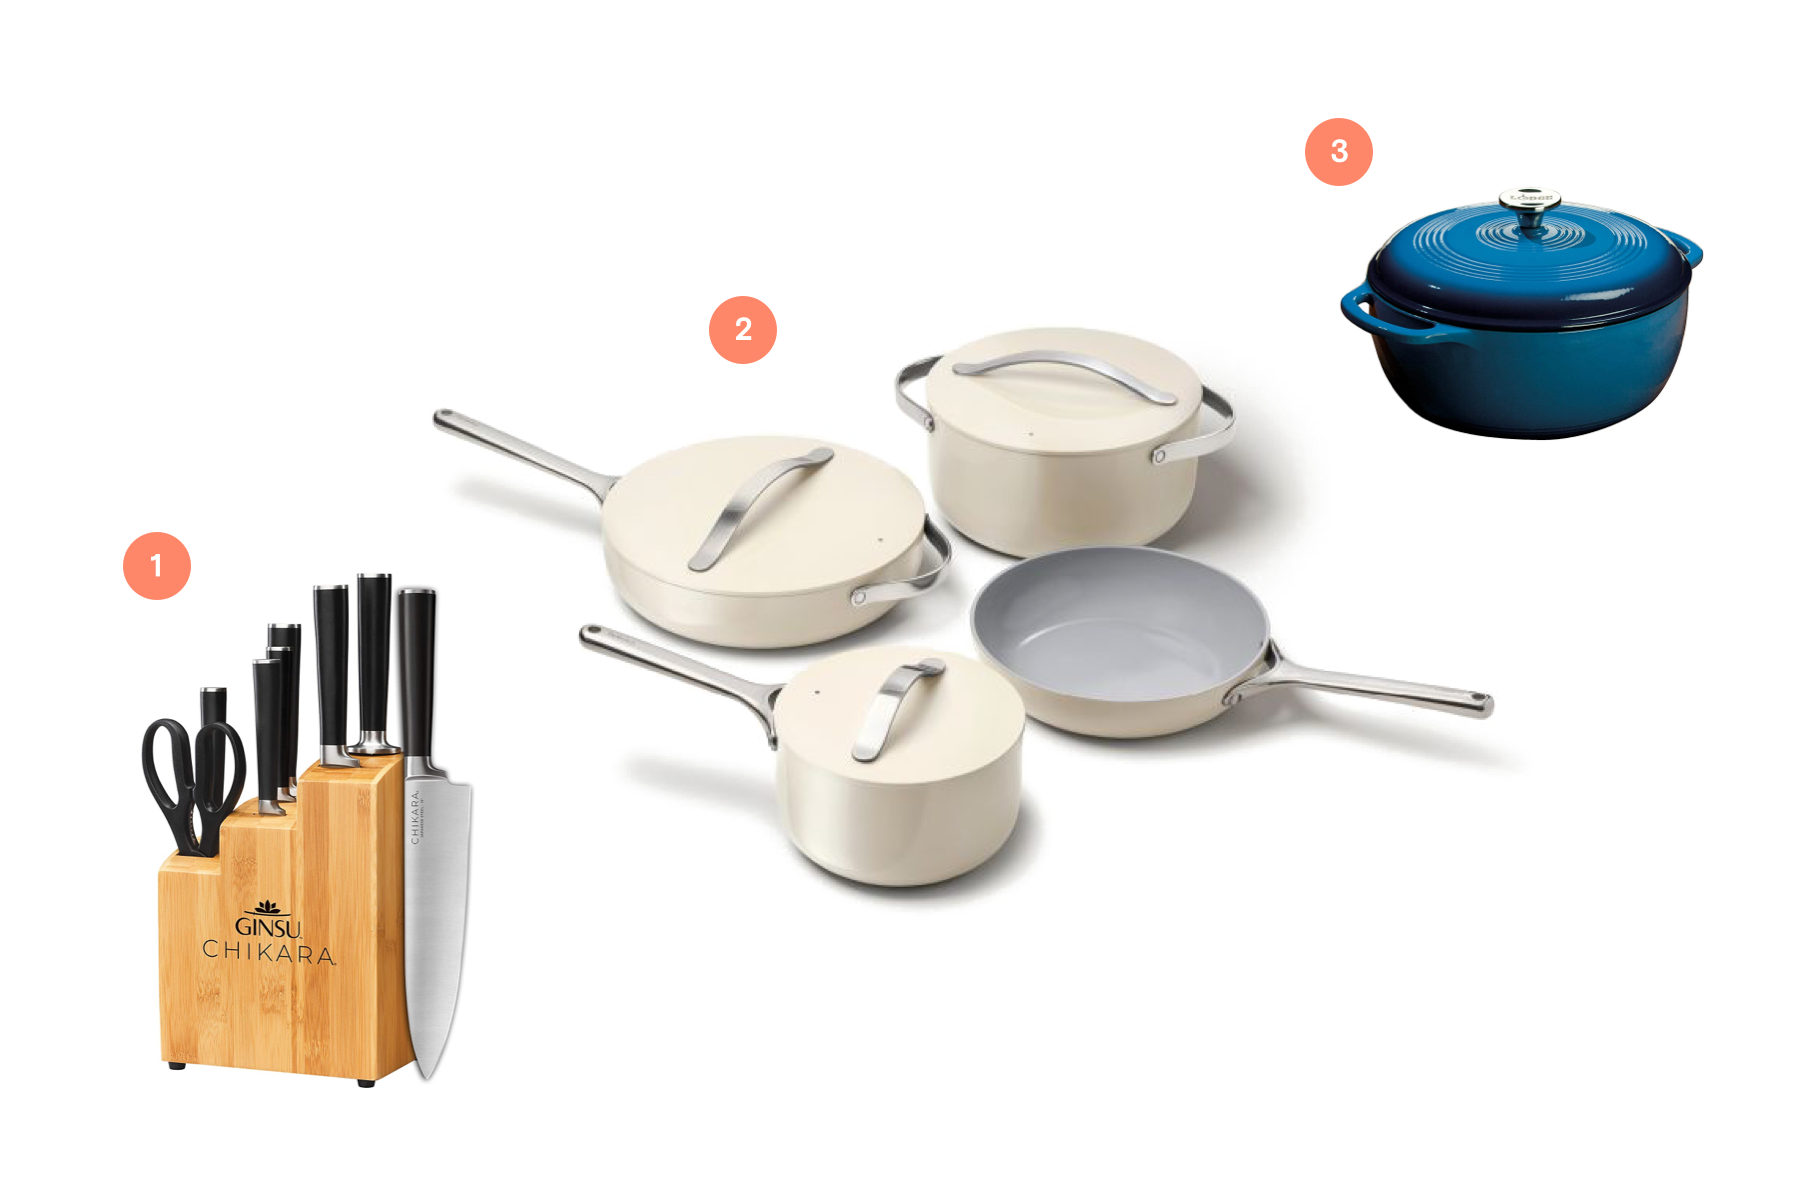 A set of knives, a set of cookware, and a baking dish as recommended by the article.